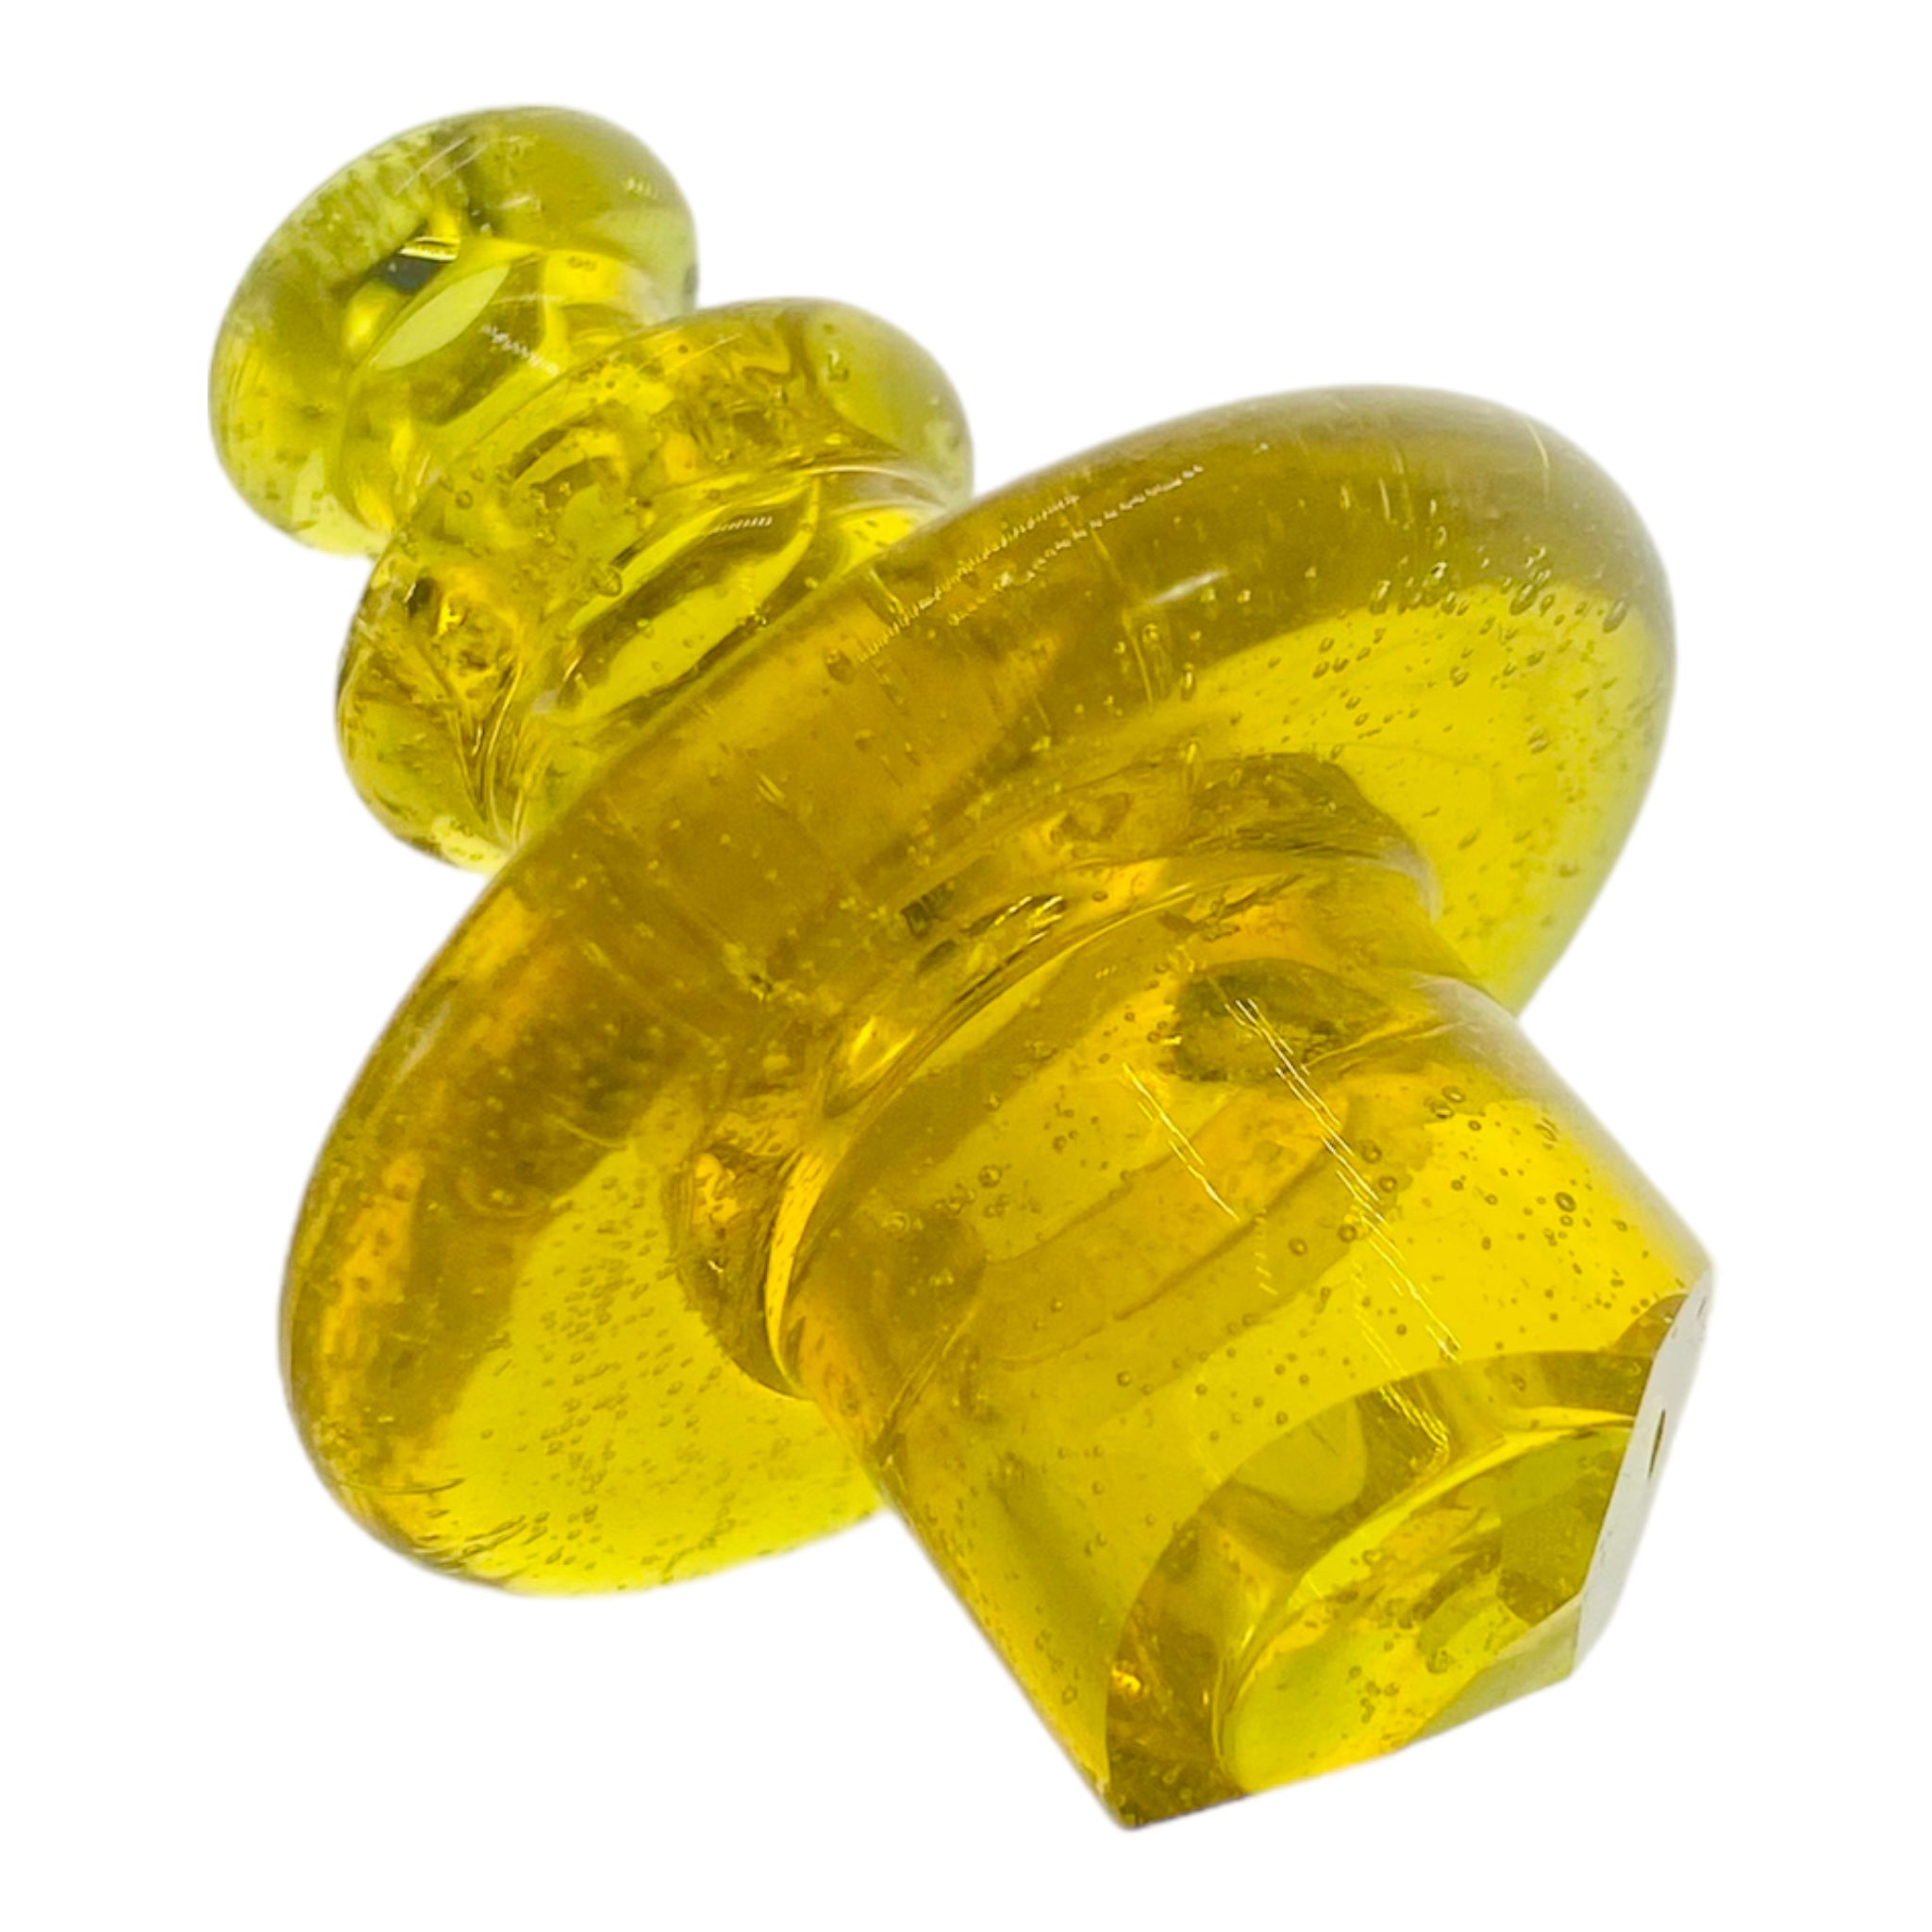 Trikky Glass - Serum CFL Reactive Faceted Glass Carb Cap